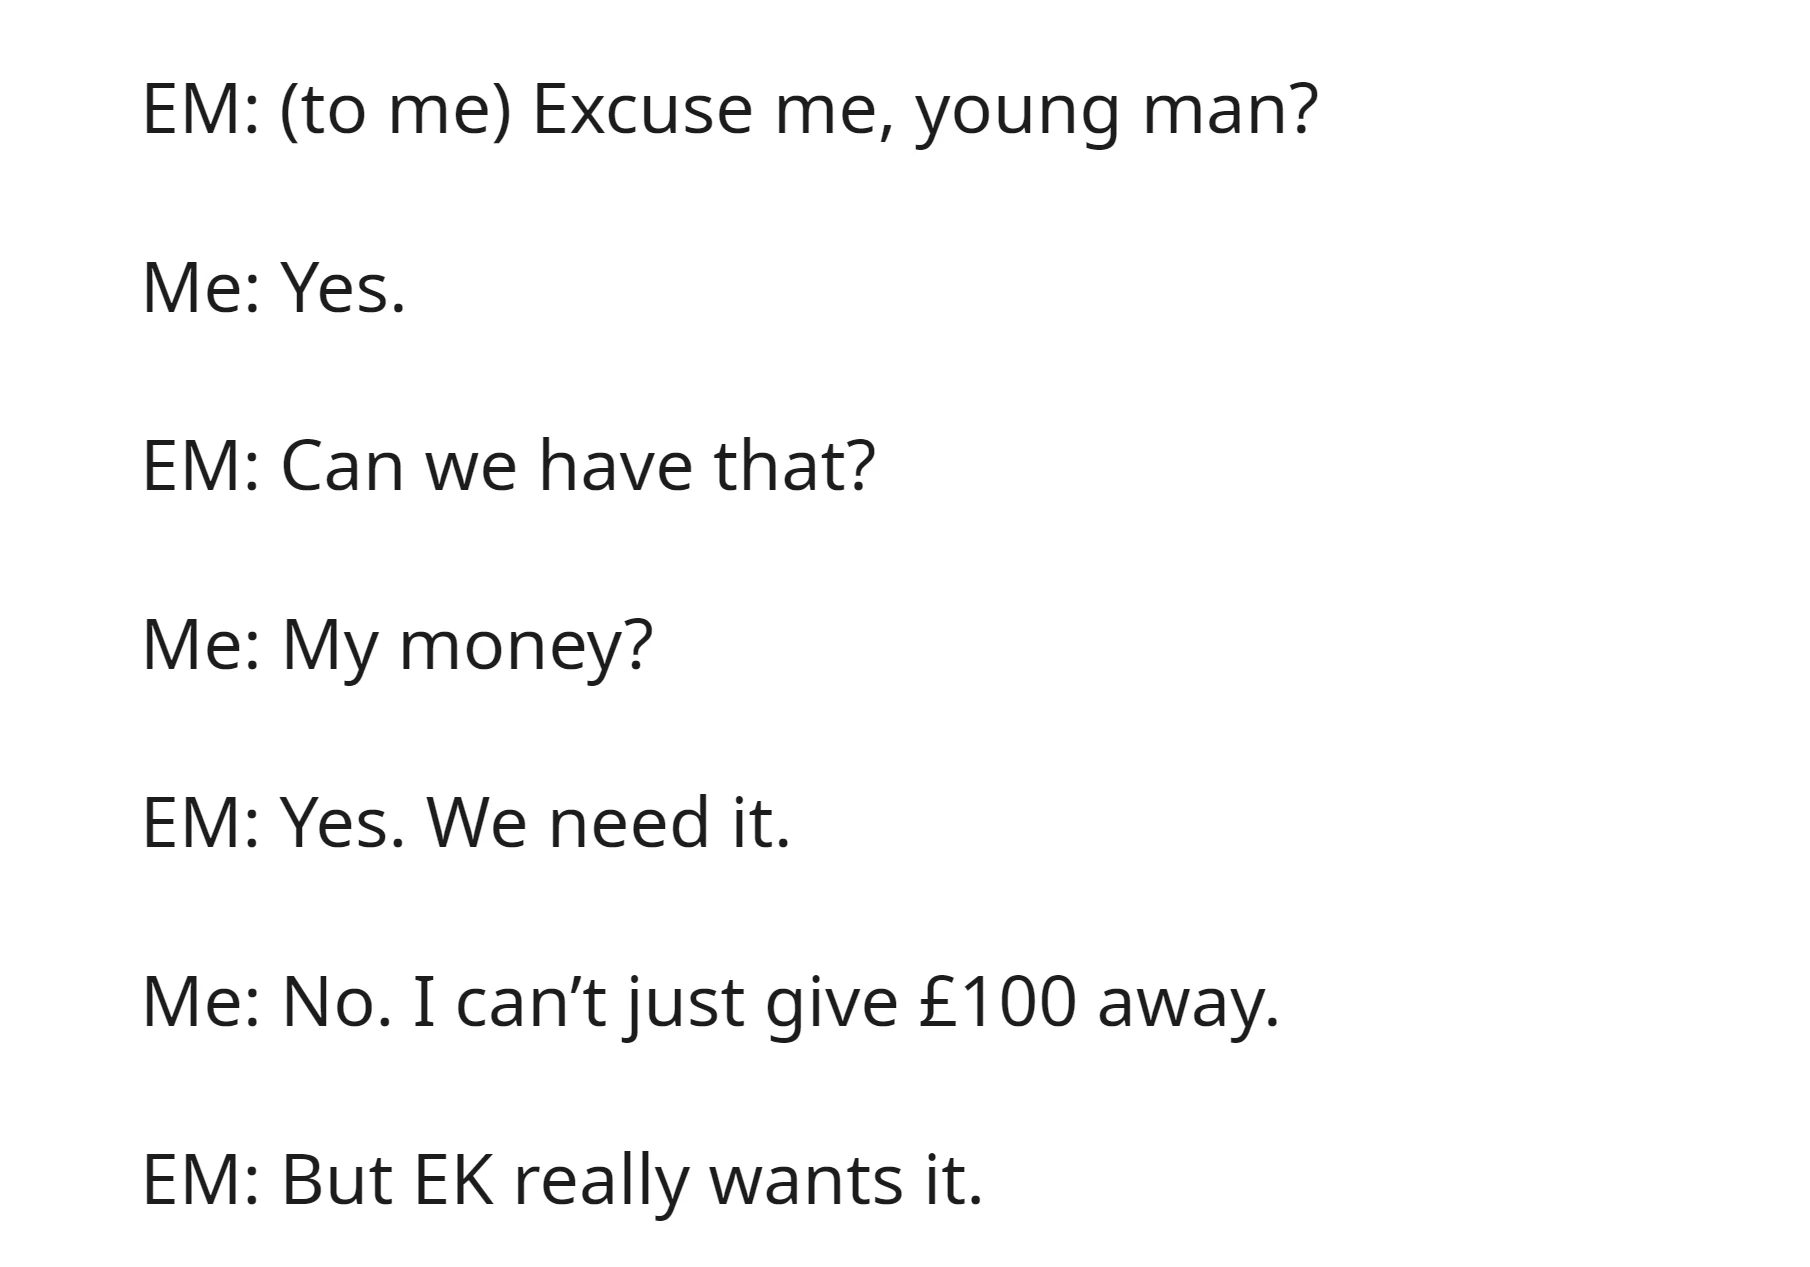 EM asked OP to give up their £100, but they refused